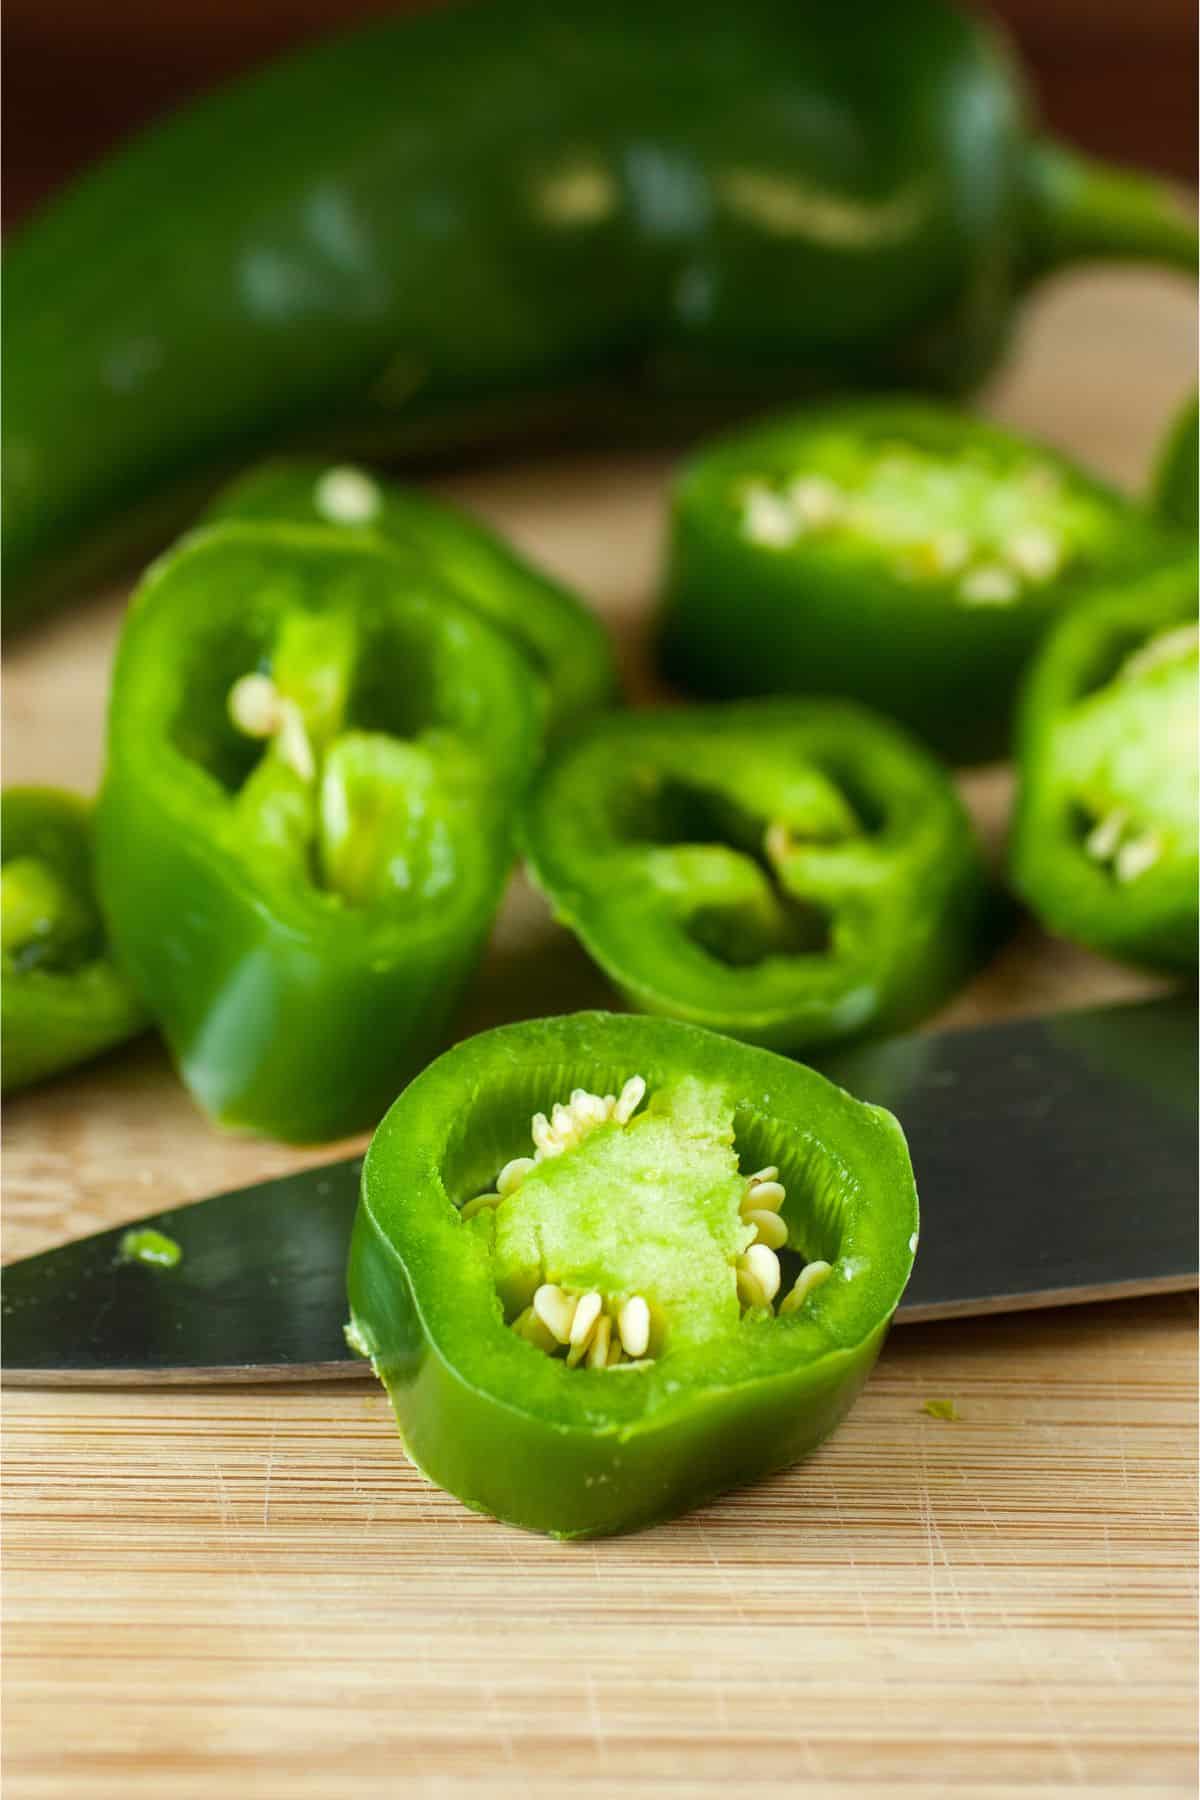 Sliced and whole jalapenos on wooden surface.